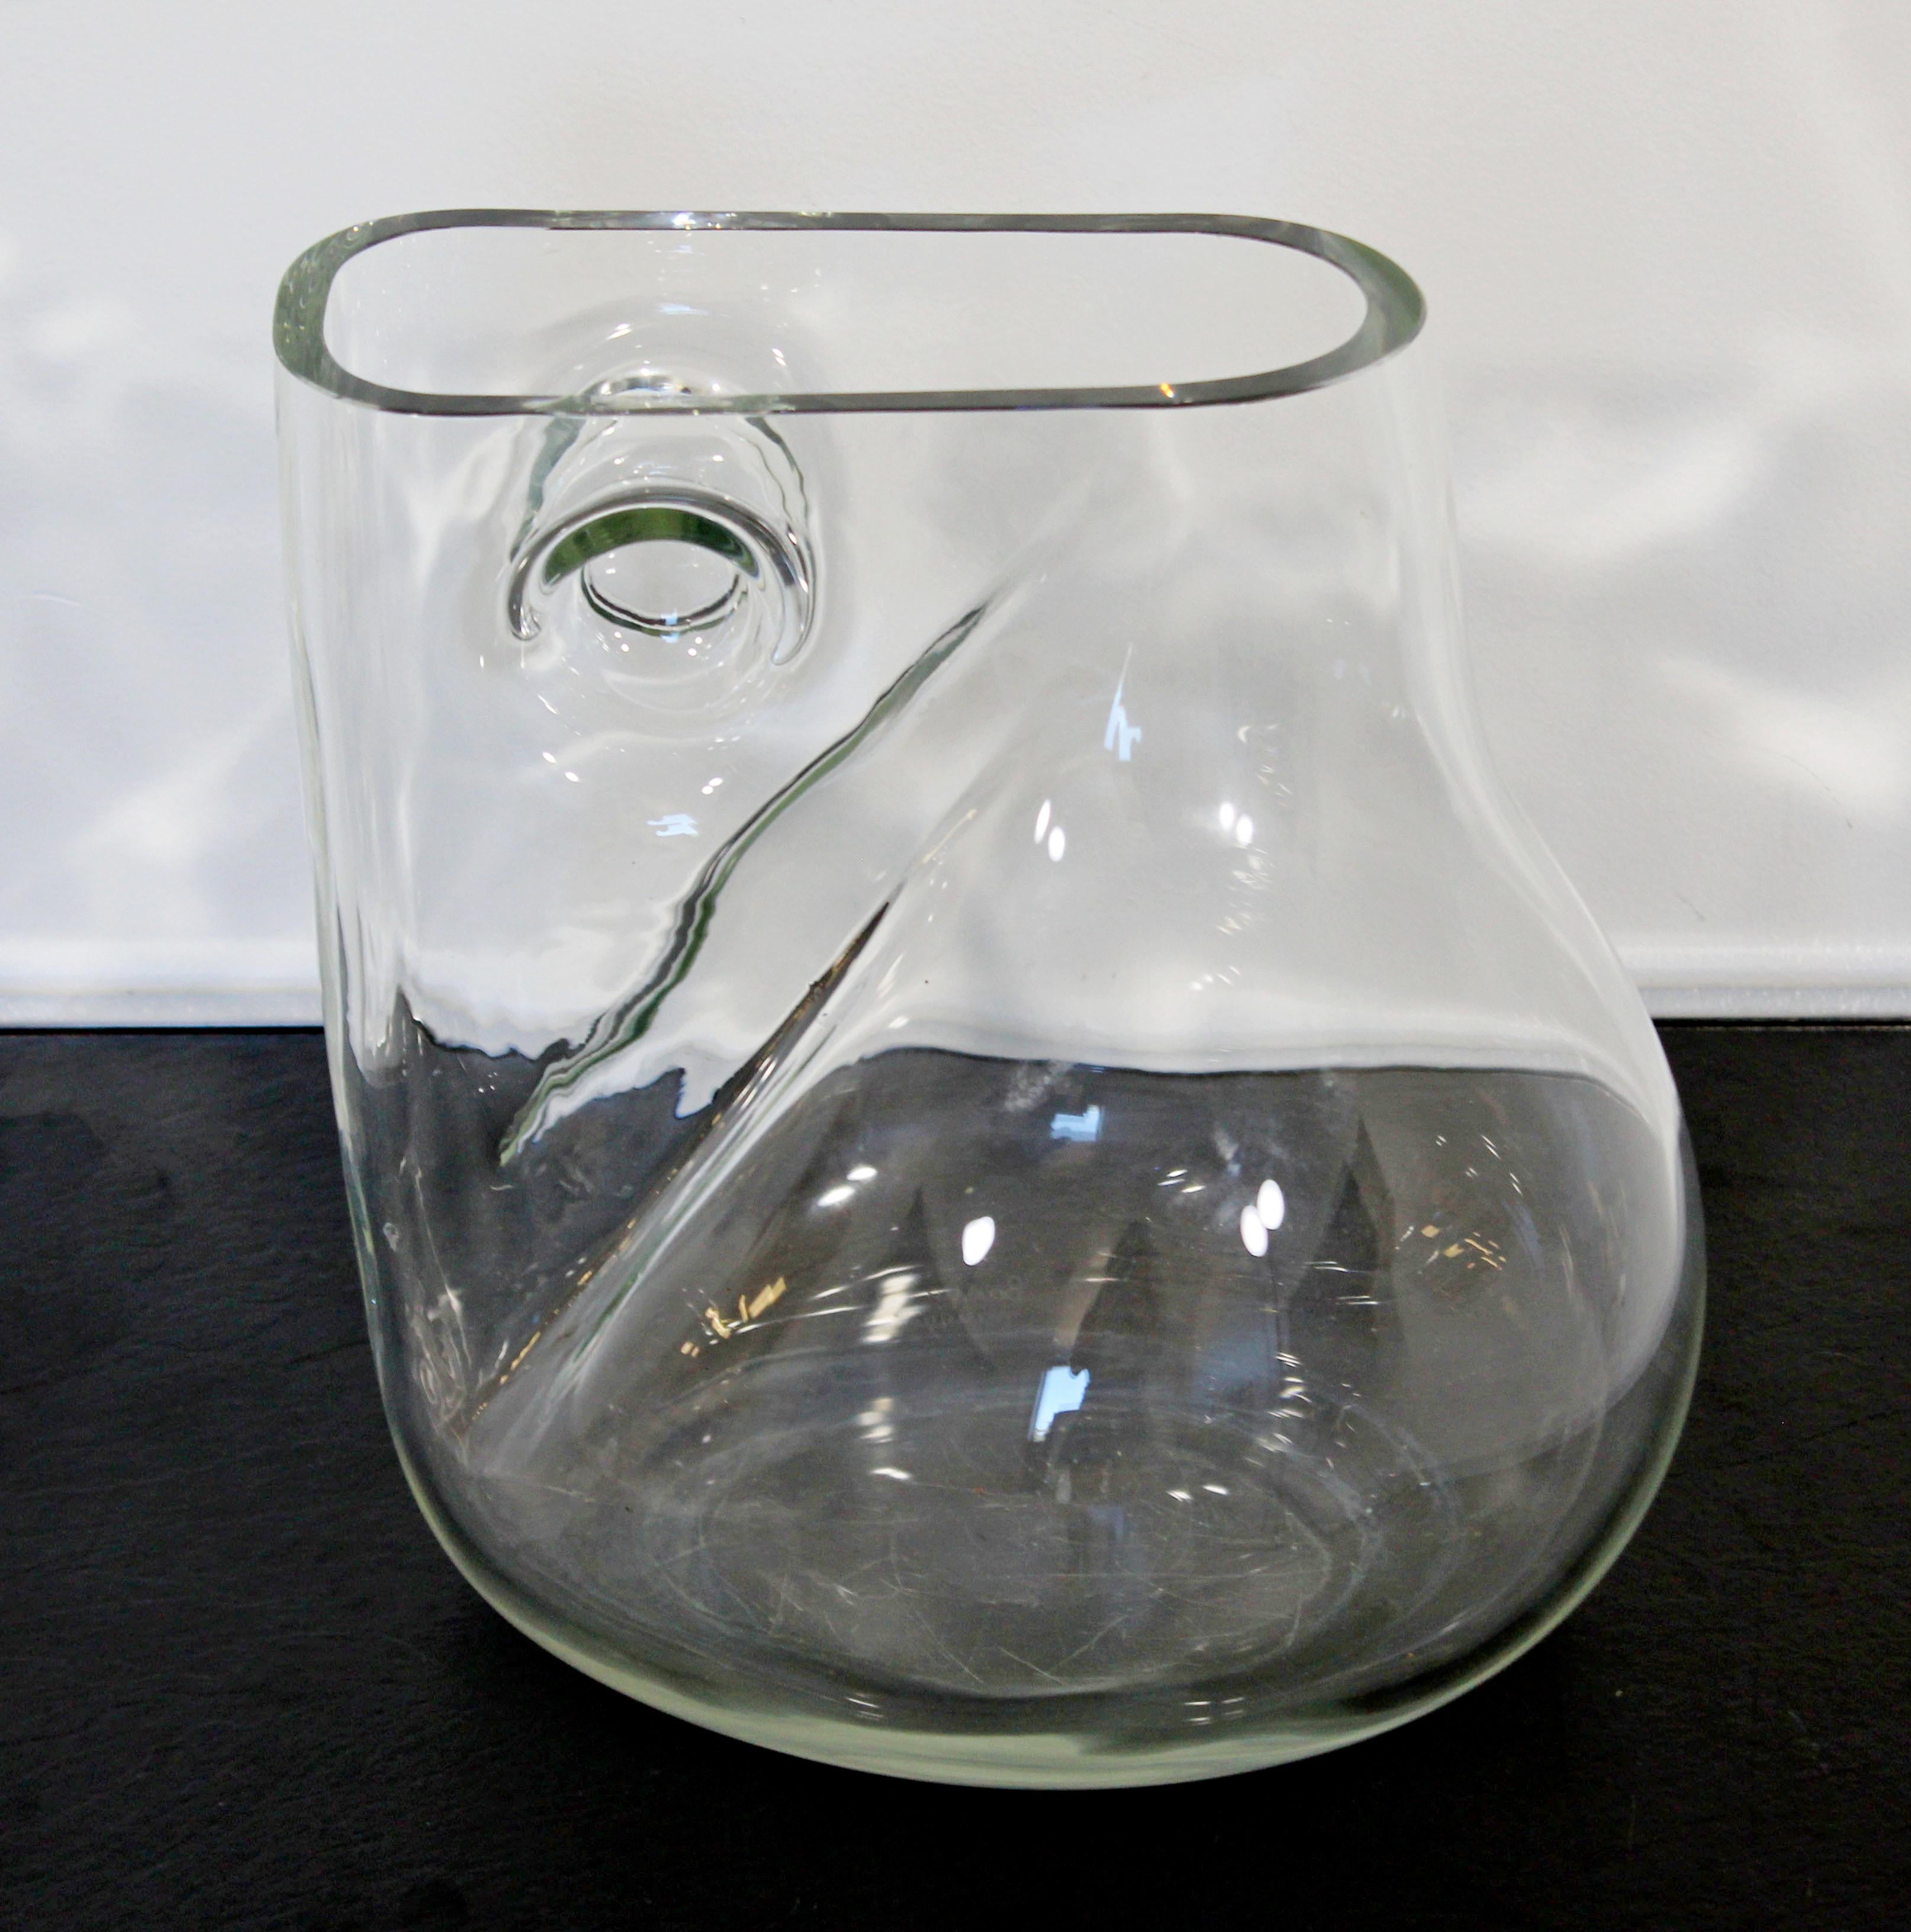 For your consideration is a stunning, Murano glass art vase or pitcher, signed by Alfredo Barbini, made in Italy. In excellent condition. The dimensions are 10